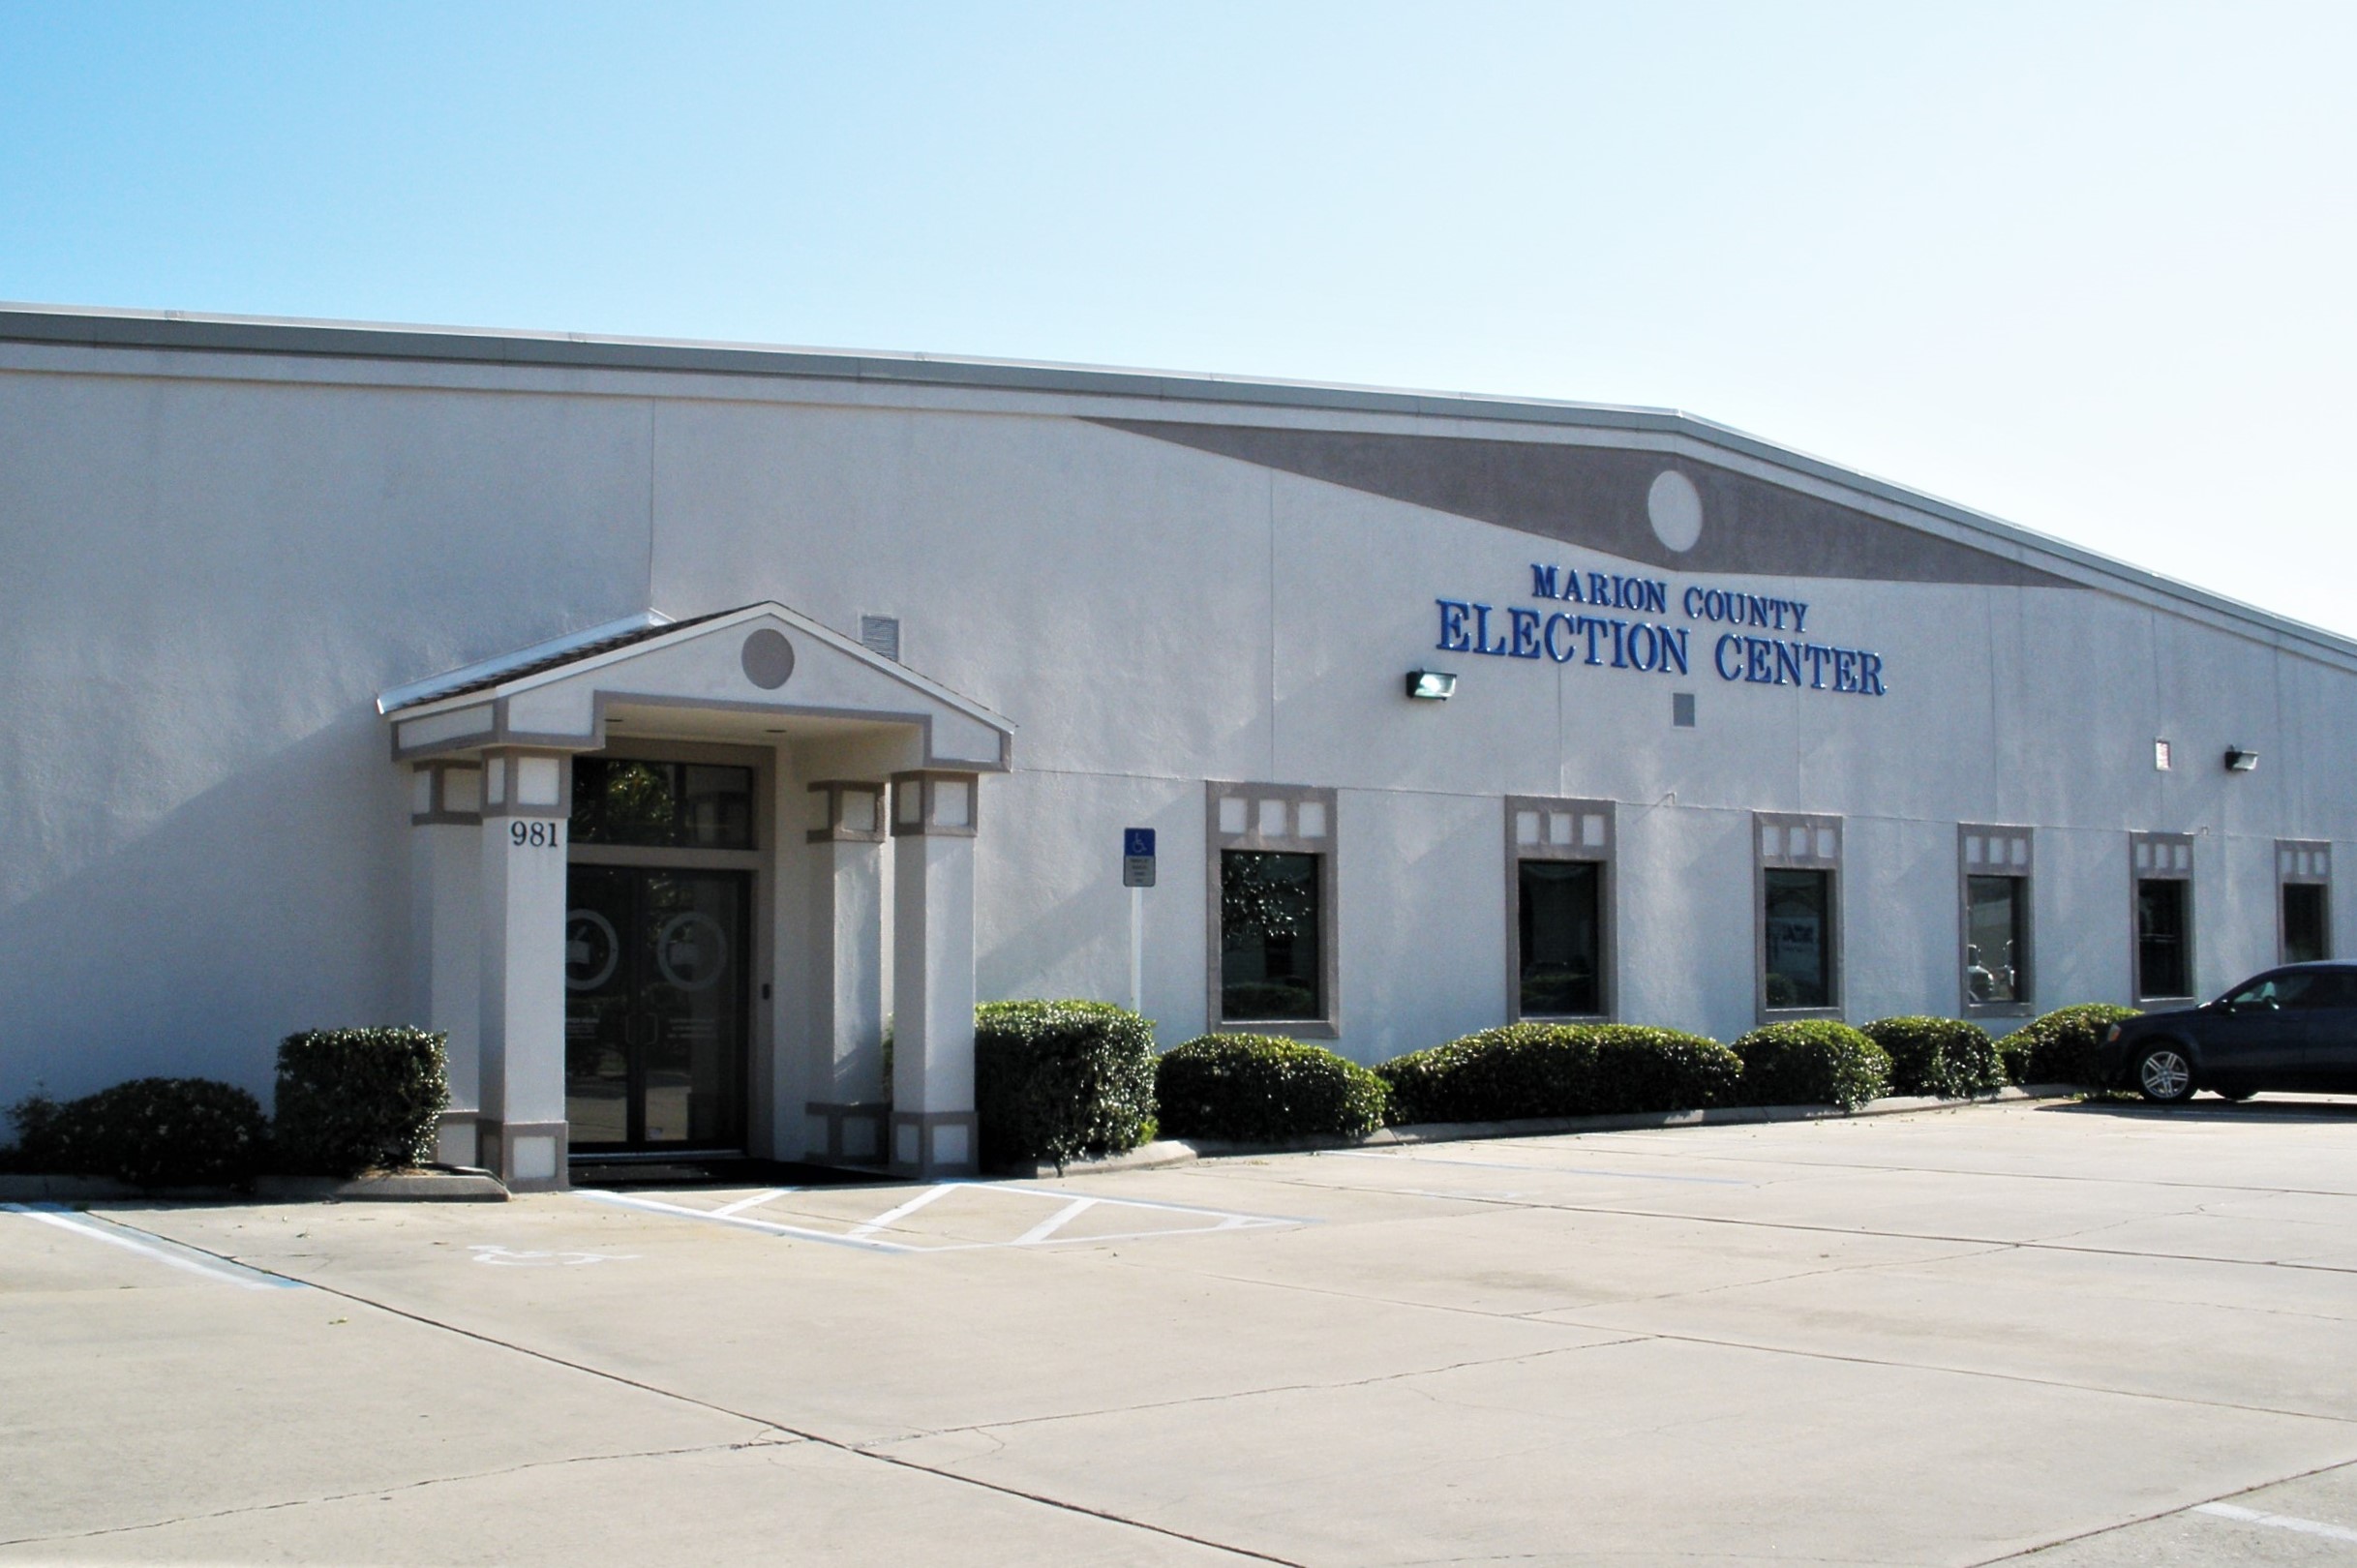 Marion County Election Center Front Building